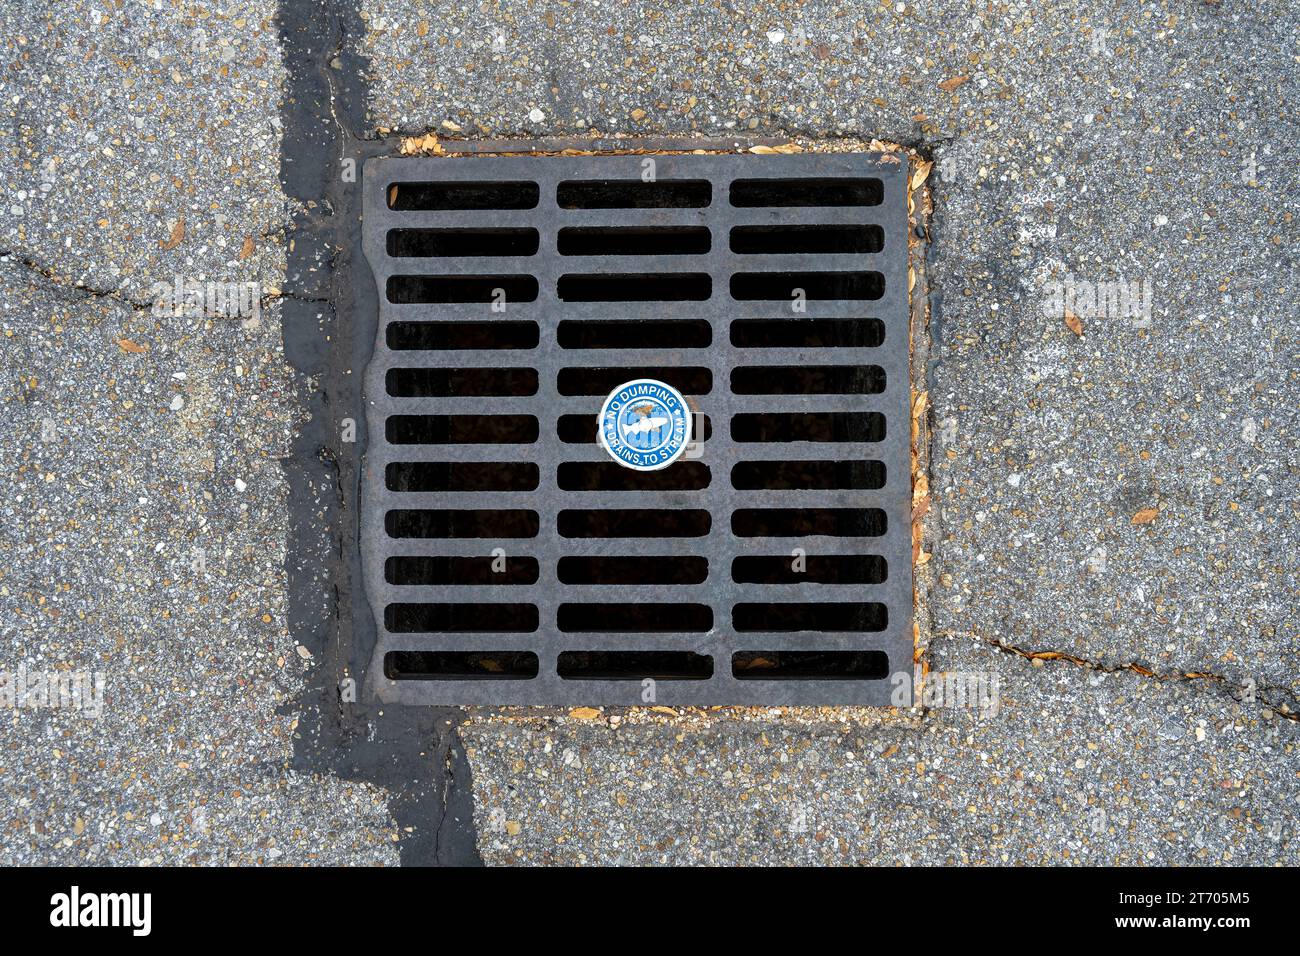 Storm drain in a parking lot with a fish symbol that indicates the drain goes into a nearby stream in an effort to be environmentally safe. Stock Photo